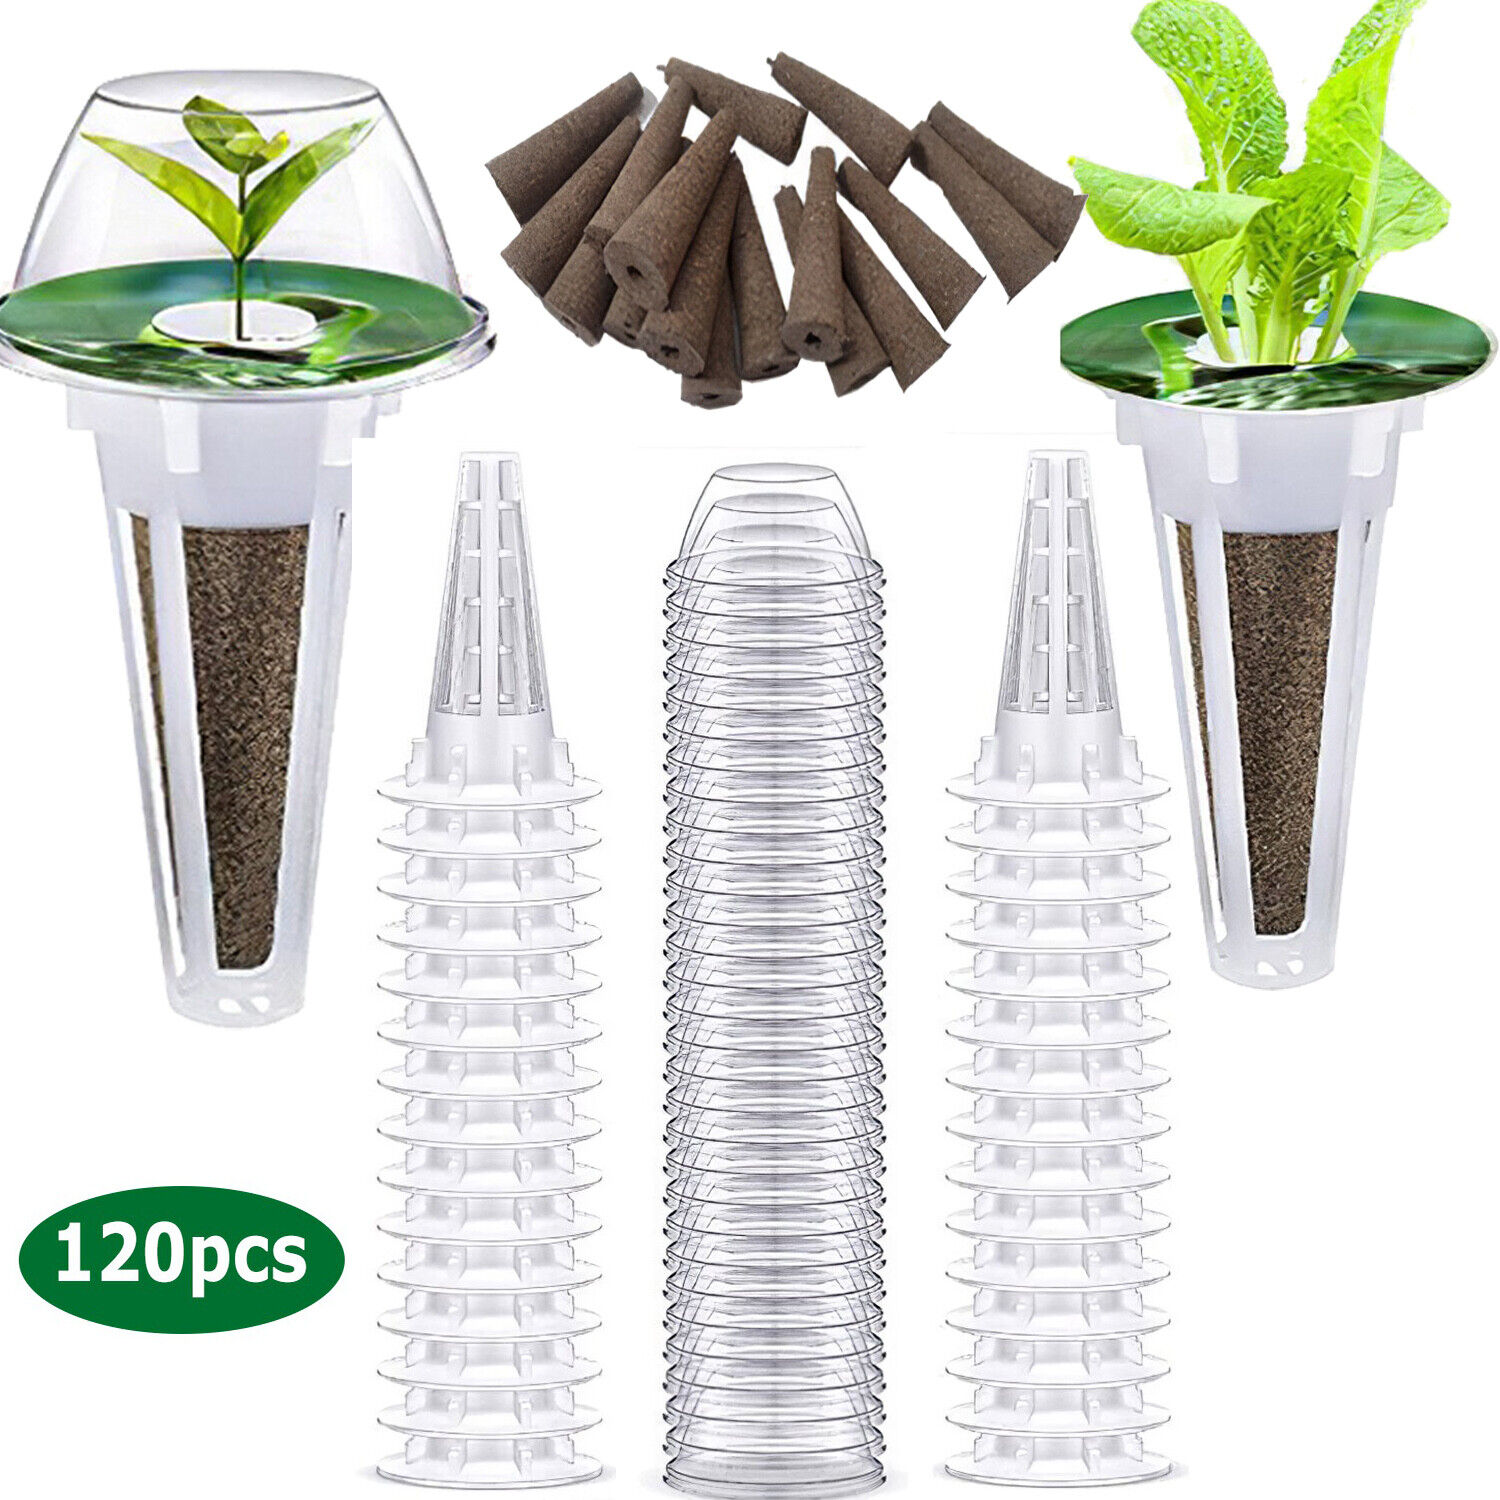 120Pcs Seed Pods Kit Hydroponics Garden Growing Accessories -Seed Starter Pods